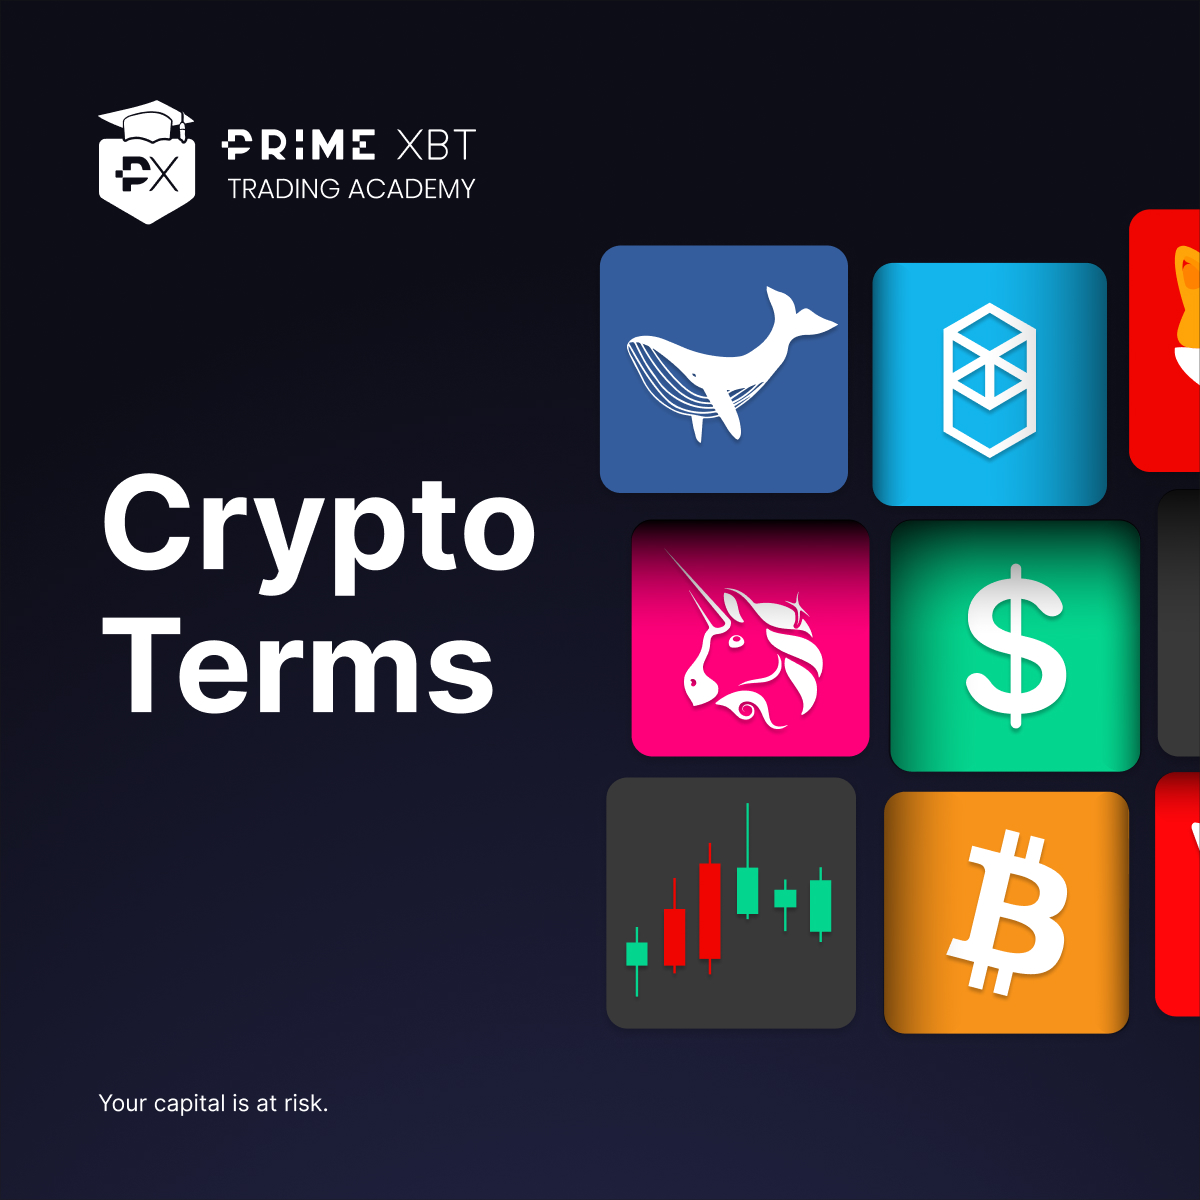 What Make PrimeXBT Trading Platform Don't Want You To Know